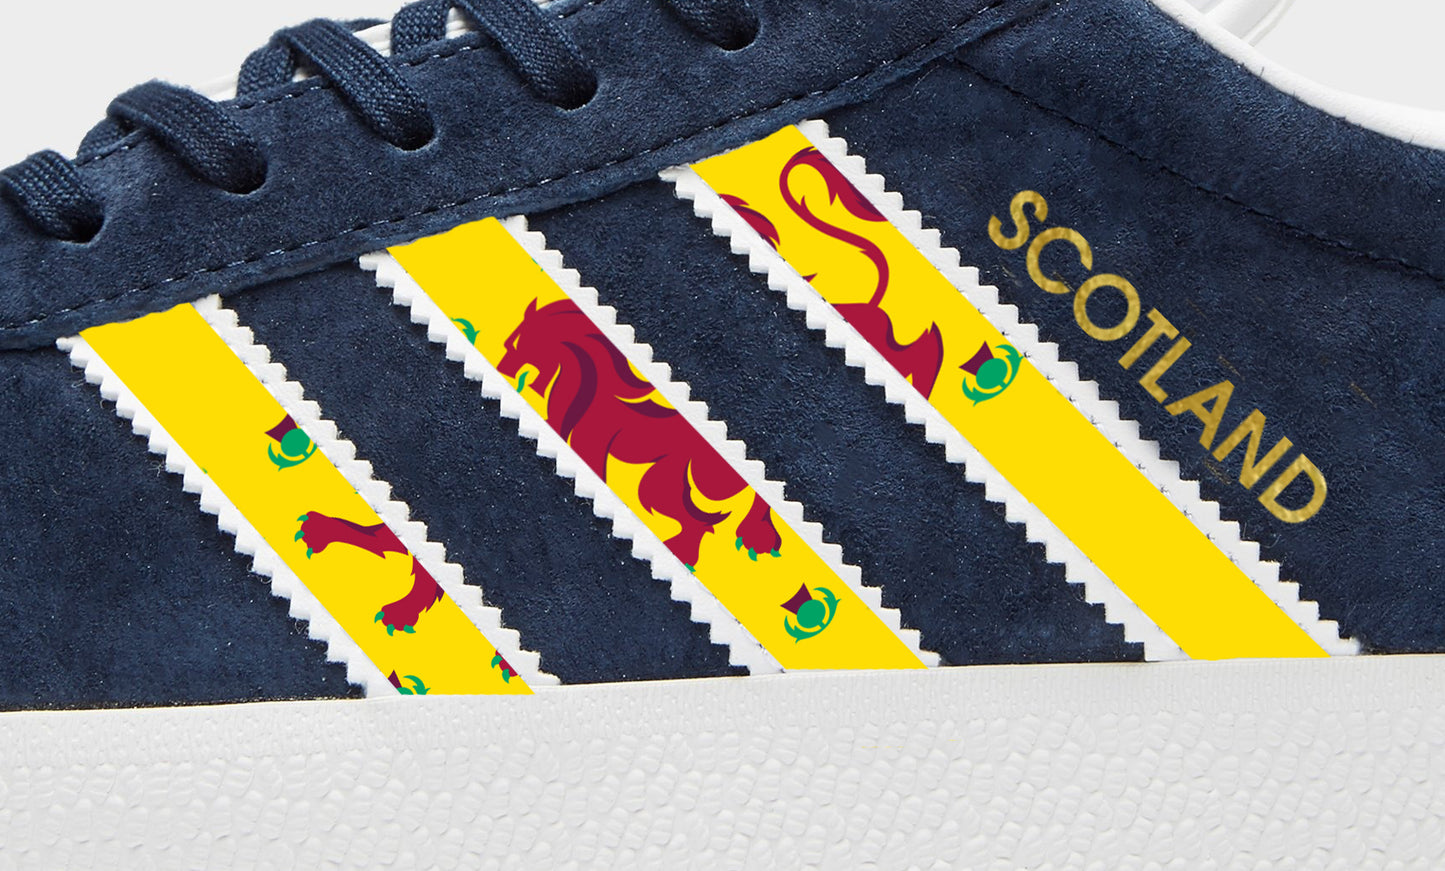 Limited edition Adidas Scotland Euro 24 Navy Gazelle trainers / sneakers